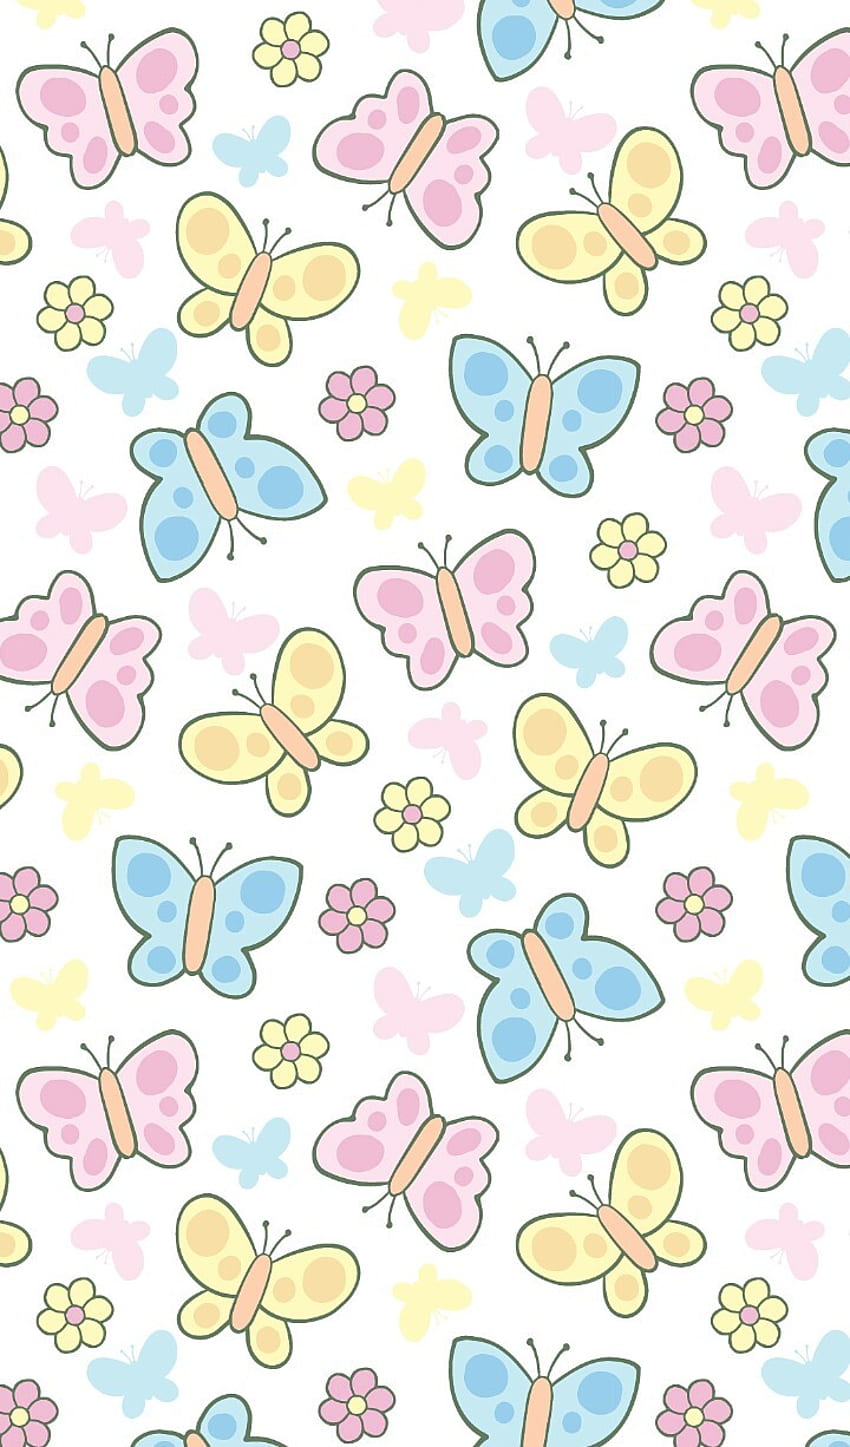 art, background, butterfly, cartoon, colorful, cute art, design, drawing, flora, flowers, illustration, iphone, leaves, pastel, pattern, patterns, pink flowers, texture, , watercolor, we heart it, background, flowers background, flowers patter HD phone wallpaper